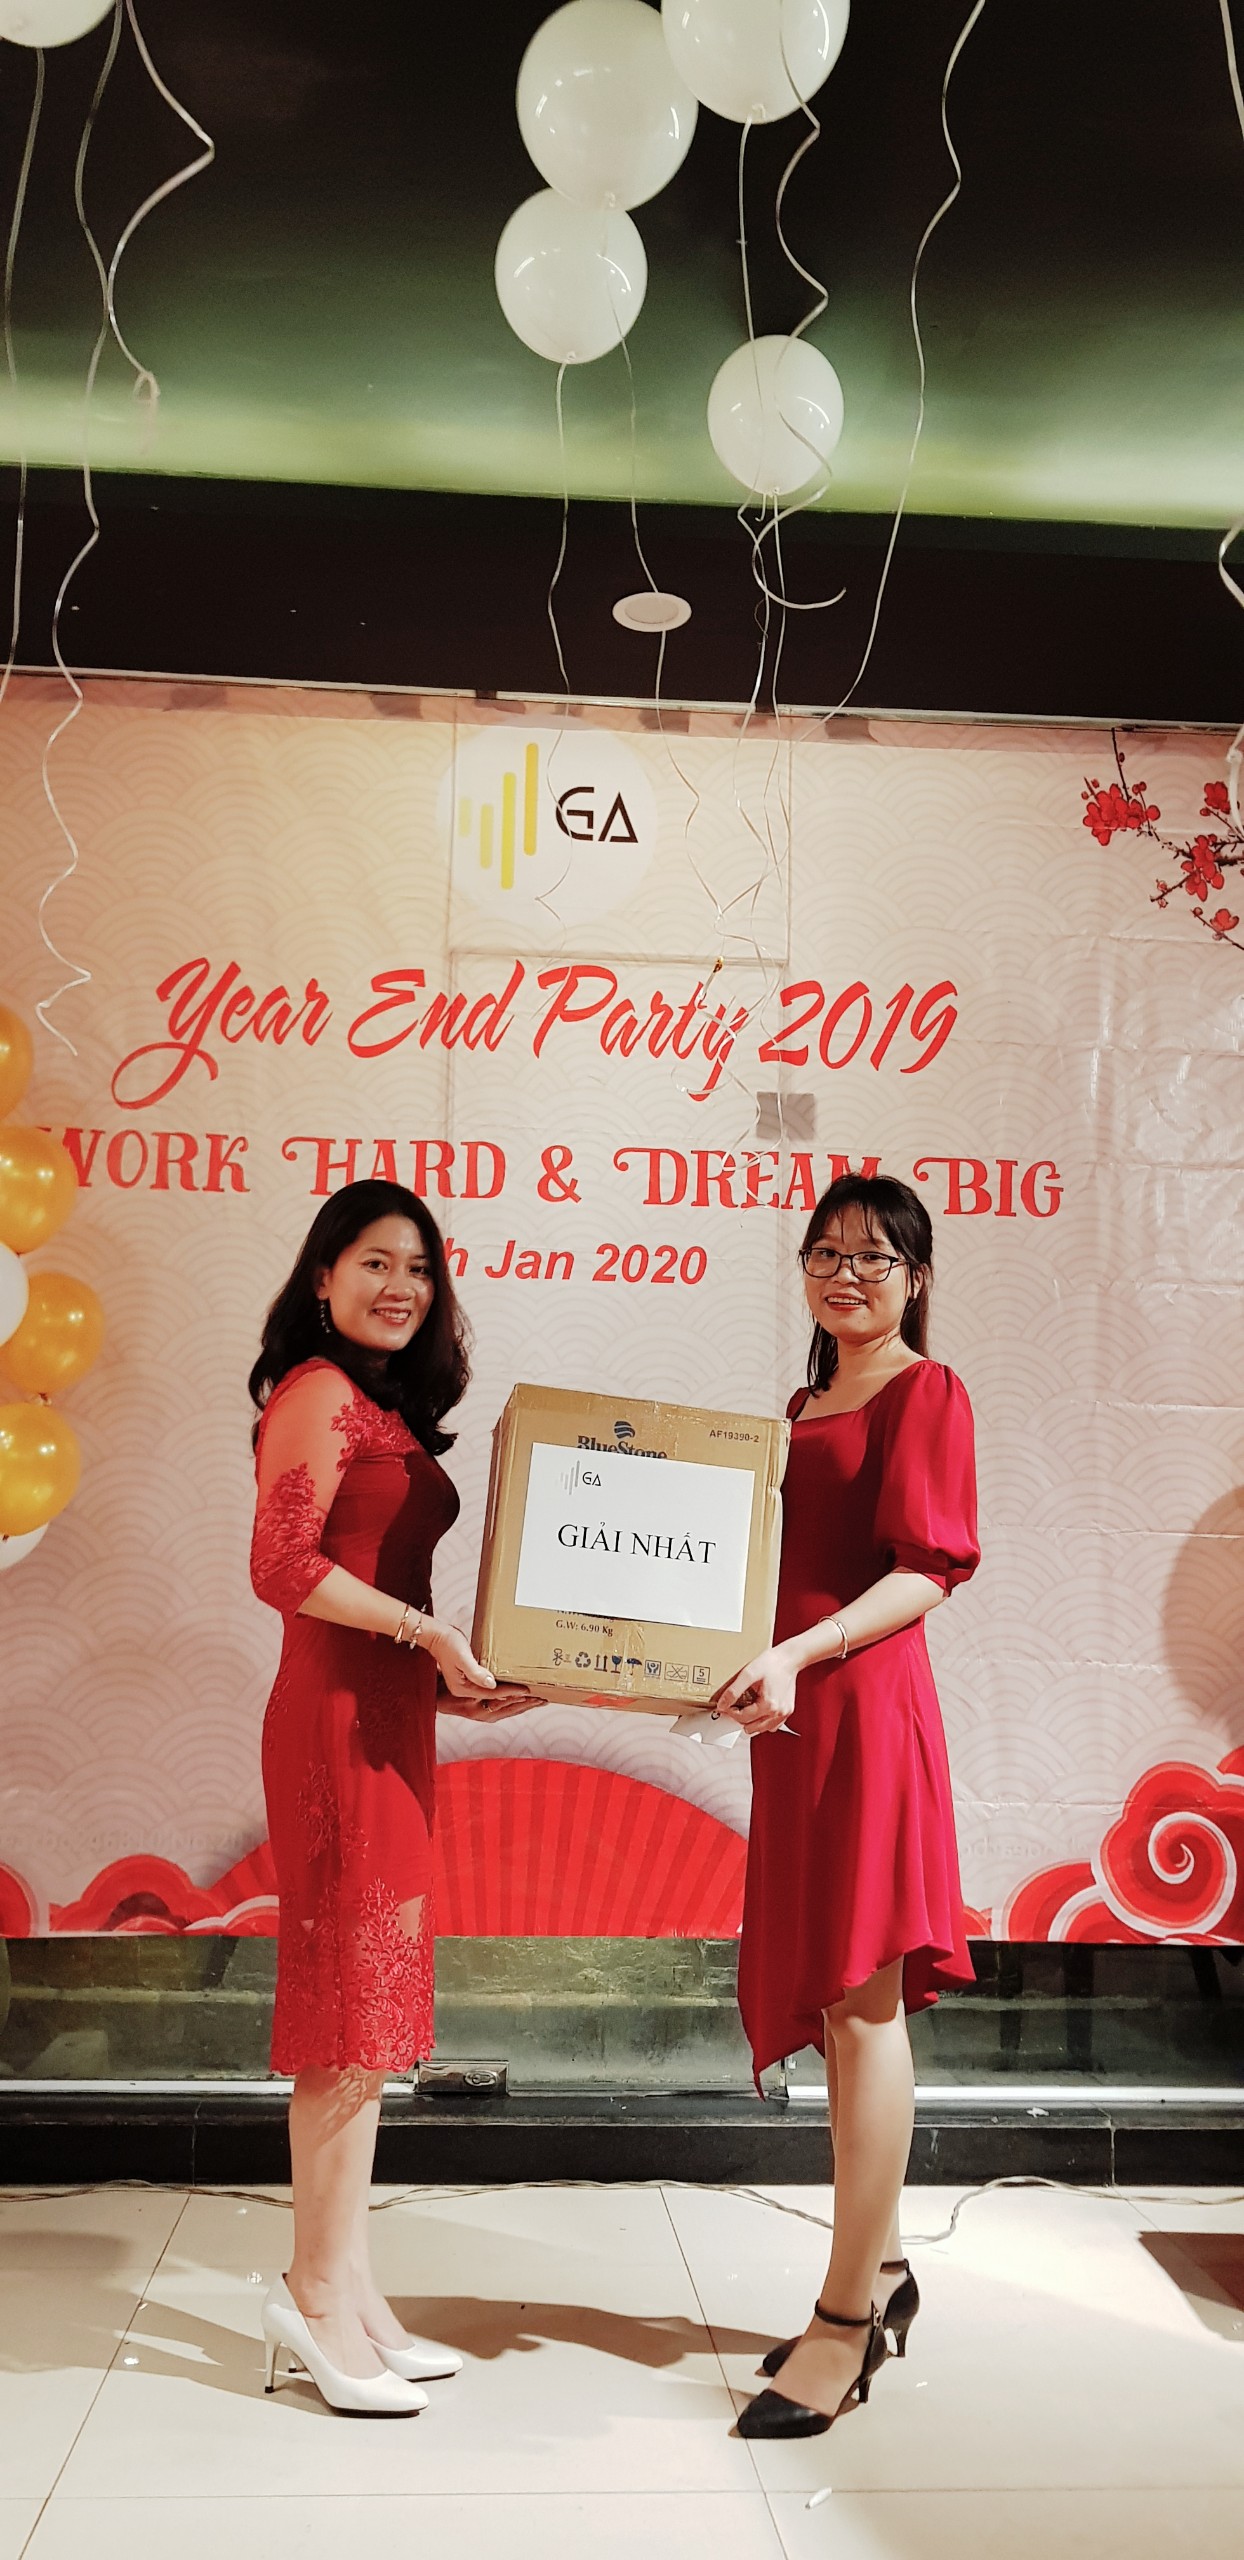 Year End Party 2019 lucky draw giai nhat